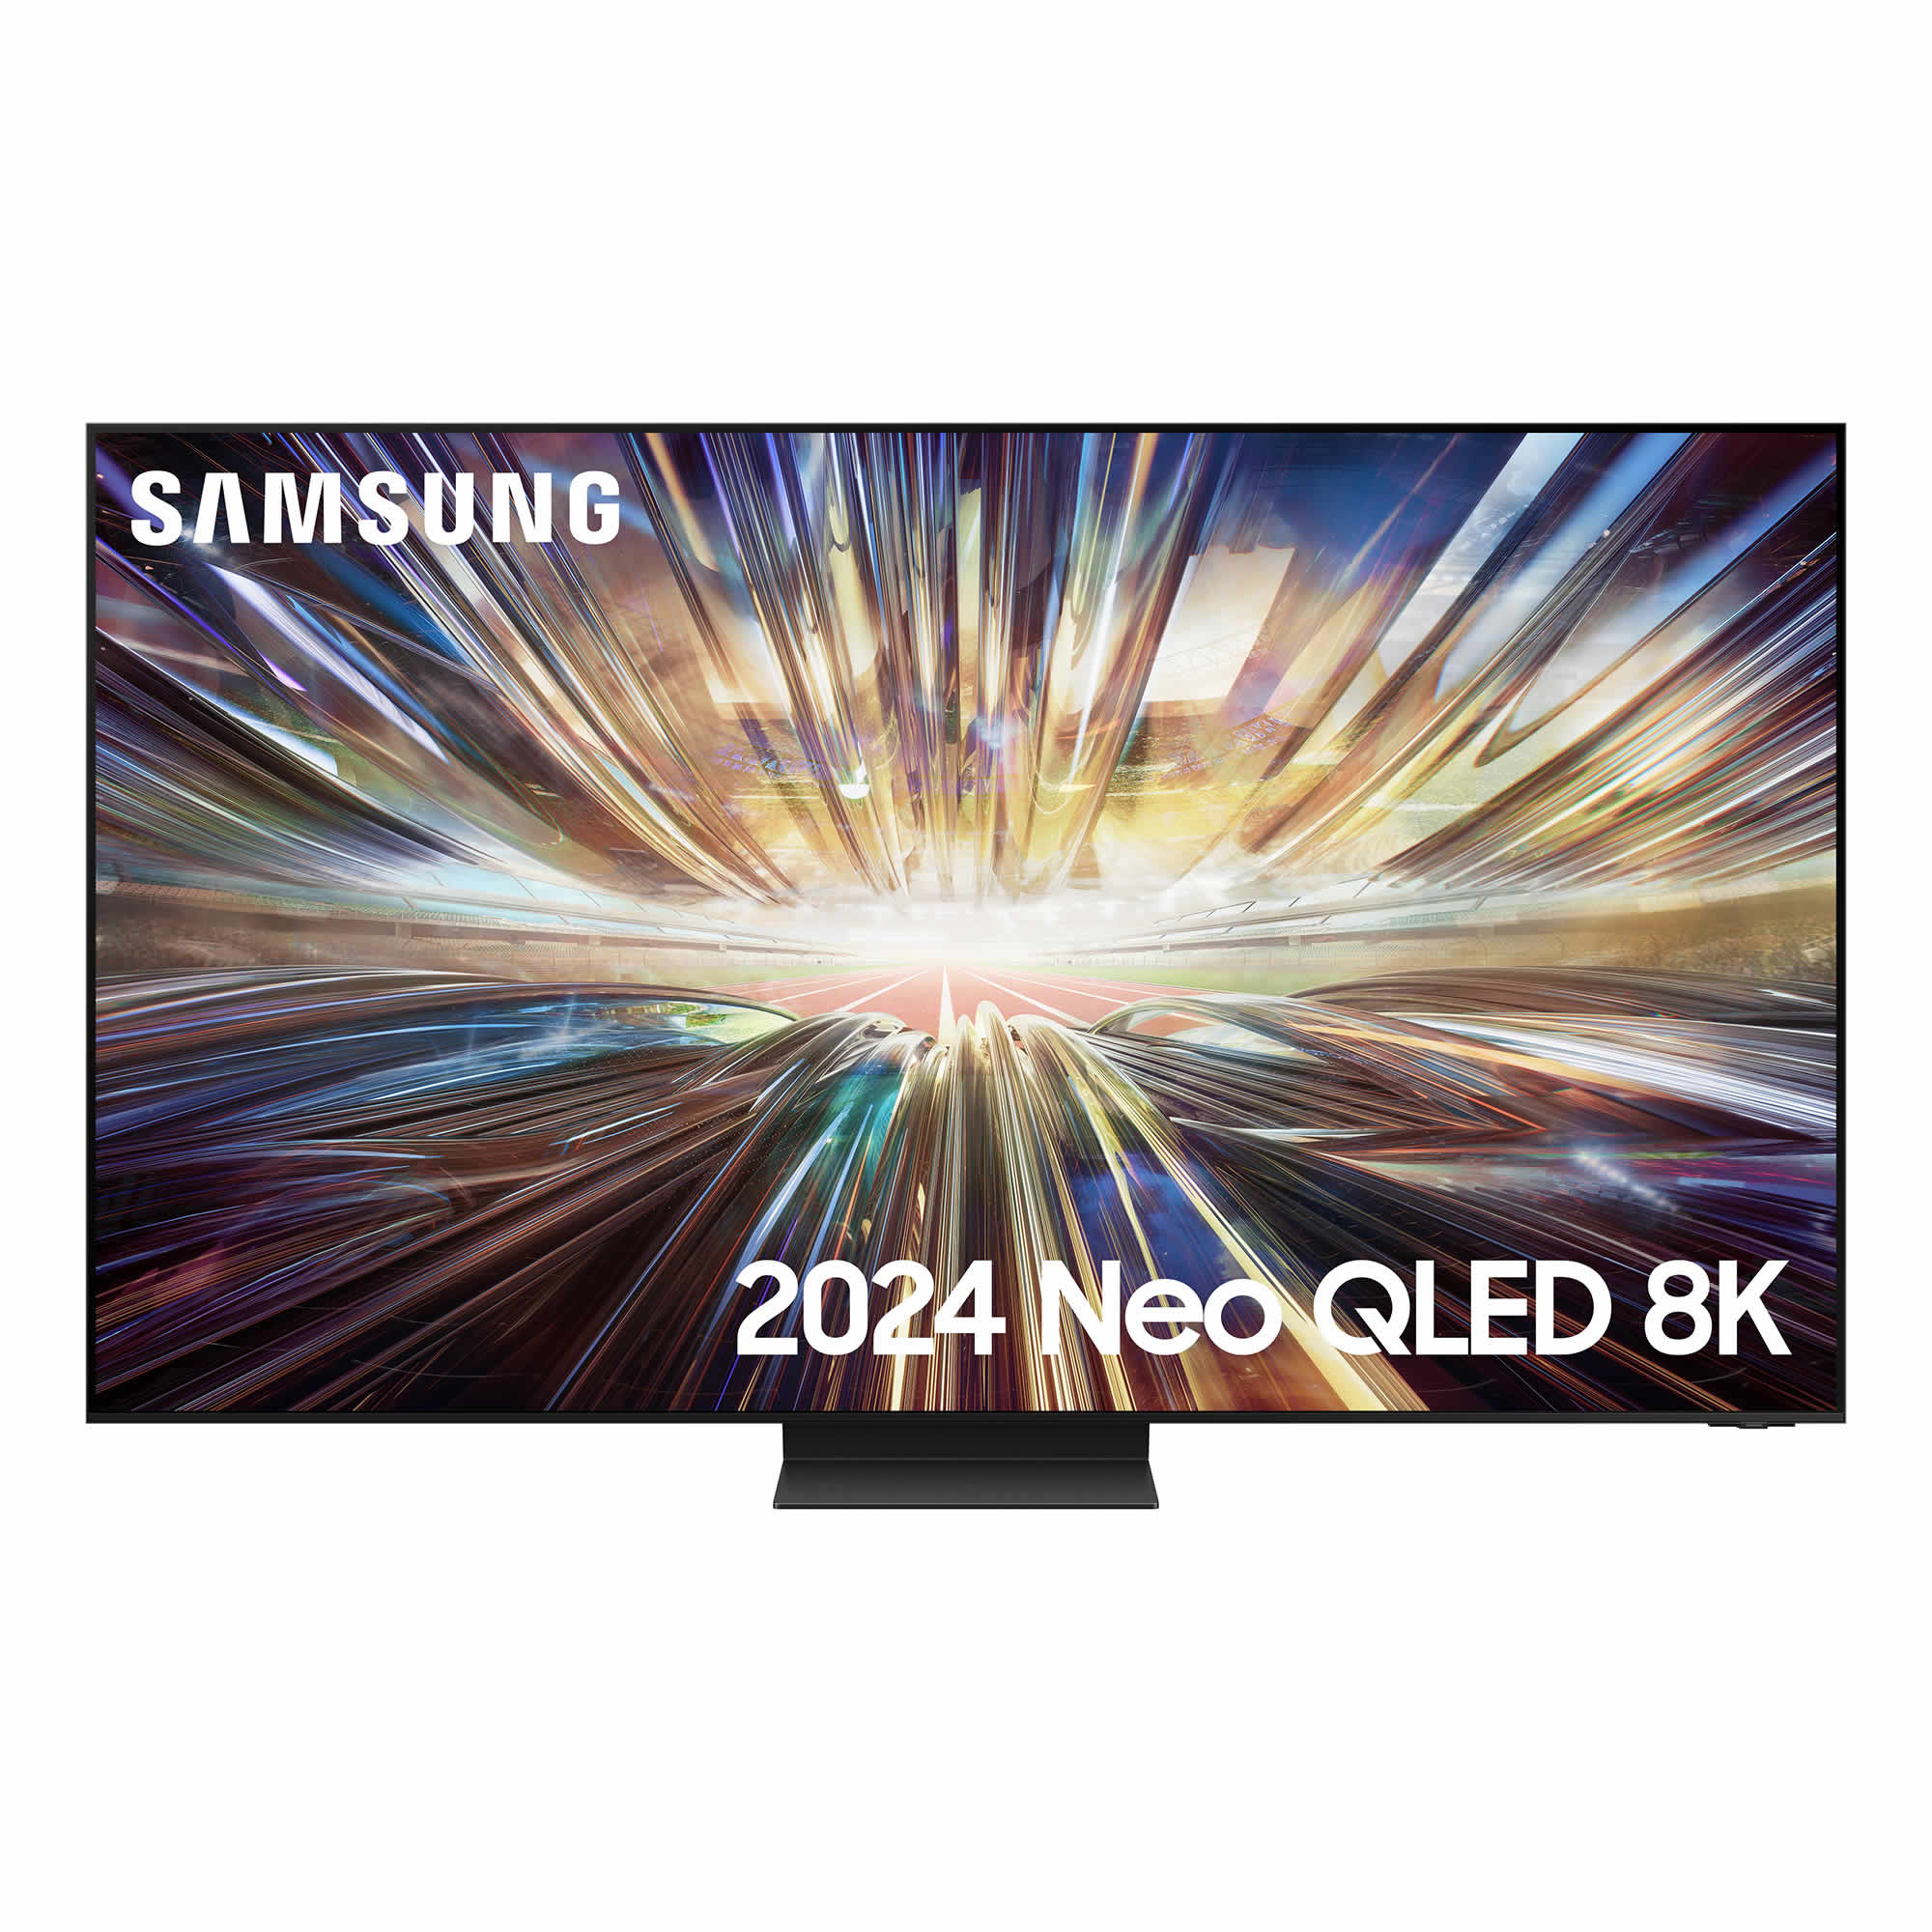 Samsung 75inch Neo QLED UHD 8K One Connect Box SMART TV WiFi